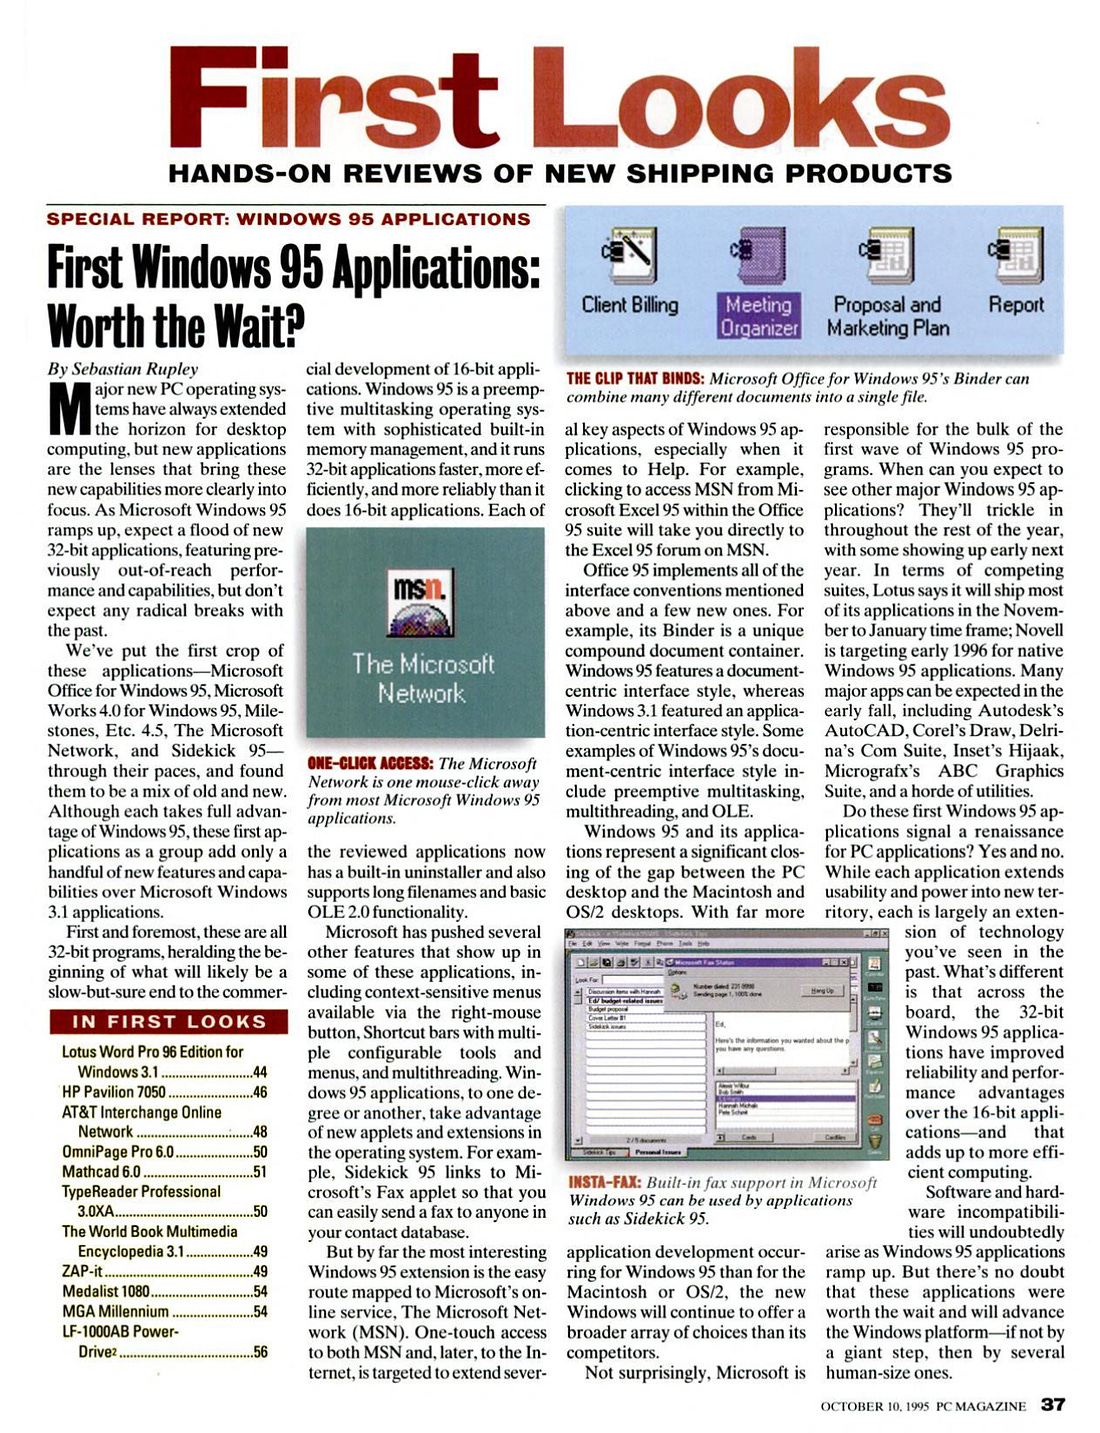 First Looks: Hands-on Reviews of latest and first Windows 95 applications.